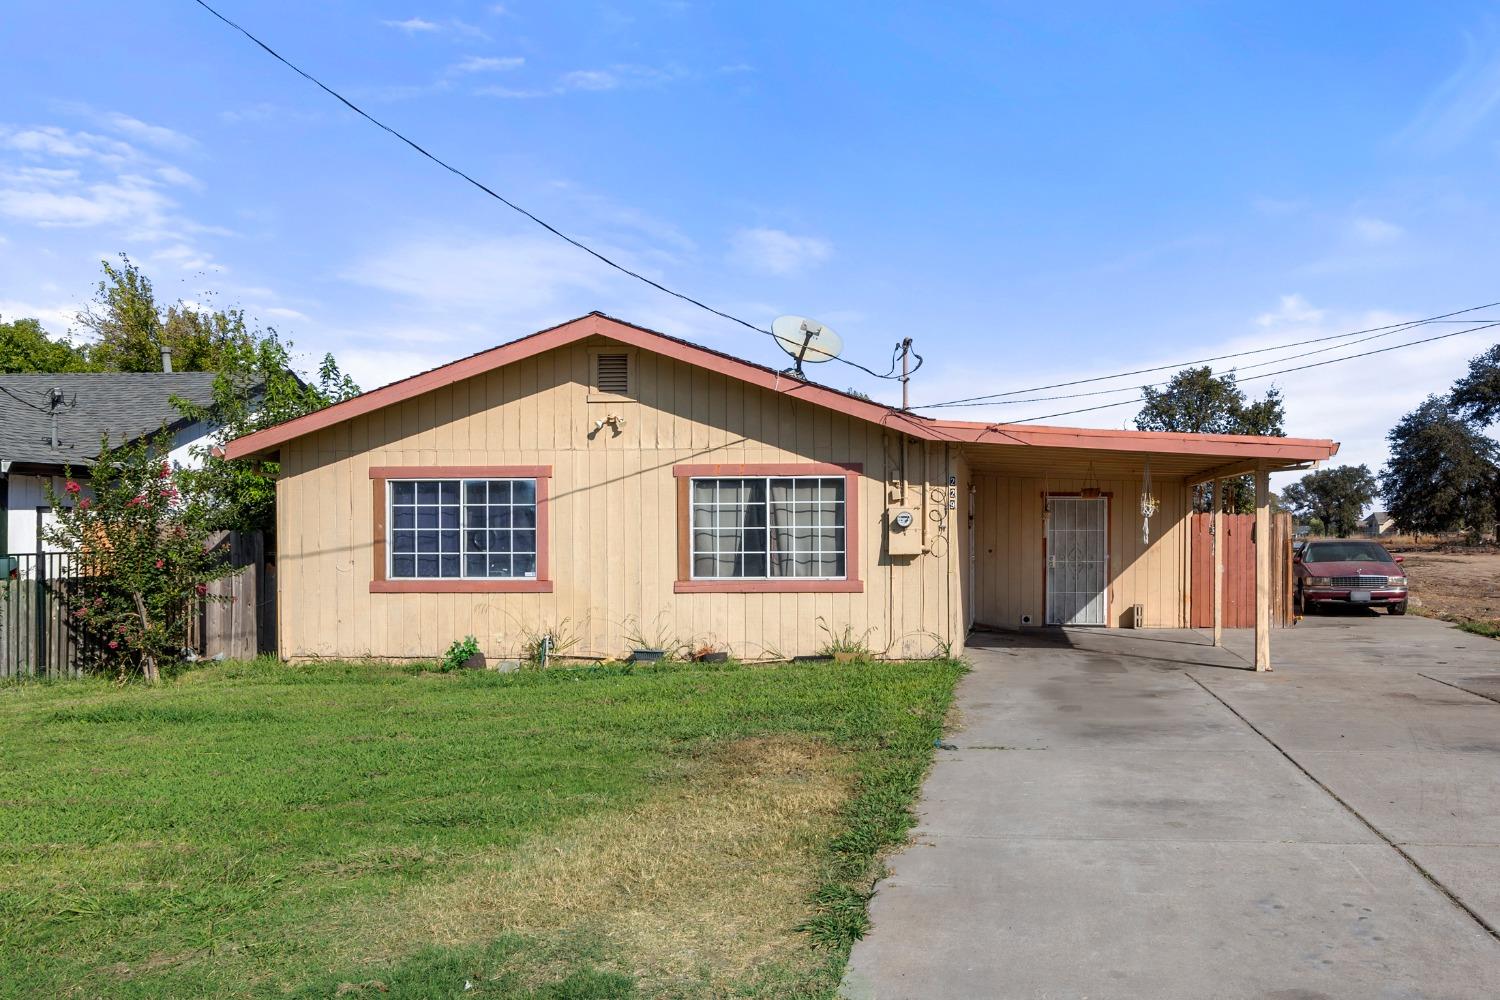 Huge price reduction- Amazing value for this charming 3 bed, 1 bath home that has newer plumbing, HVAC, water heater, and roof. Situated as the first home on the block, essentially a corner lot, this property offers ample interior and exterior space to reimagine and reinvigorate.